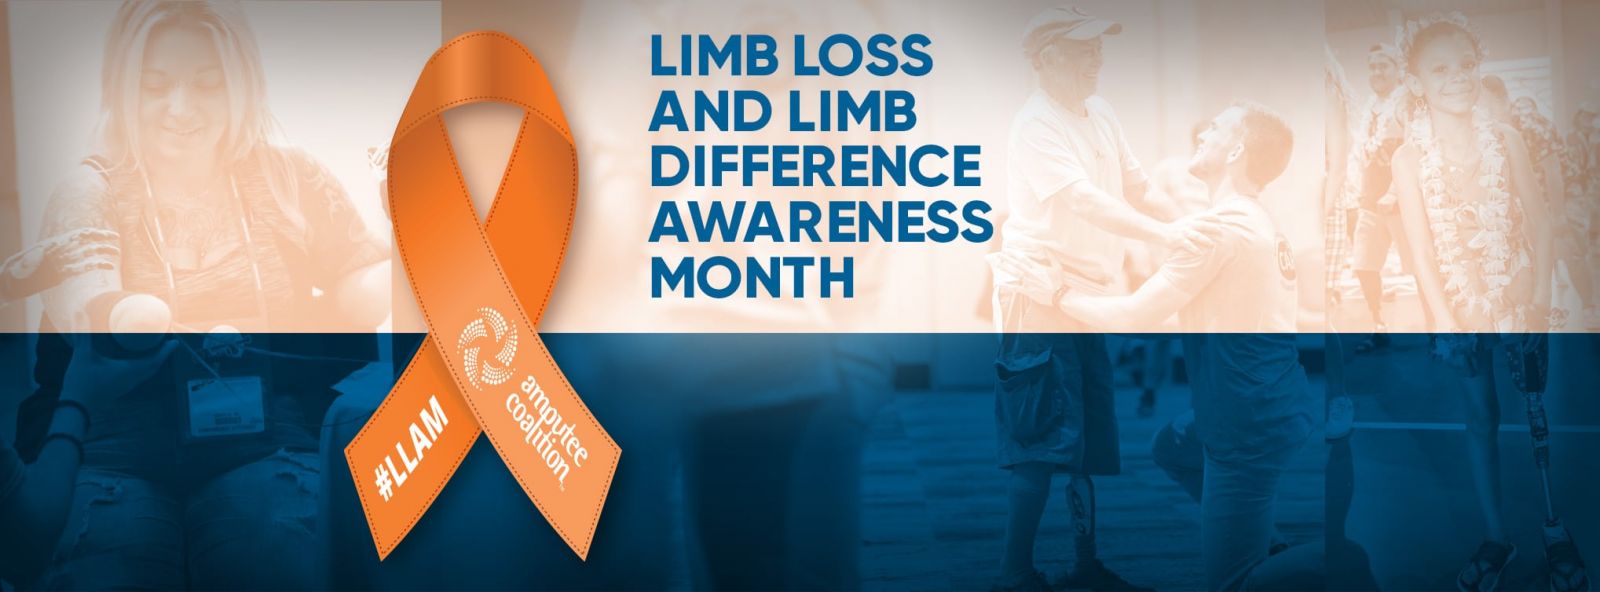 April is Limb Loss and Limb Difference Awareness Month! ‹ News